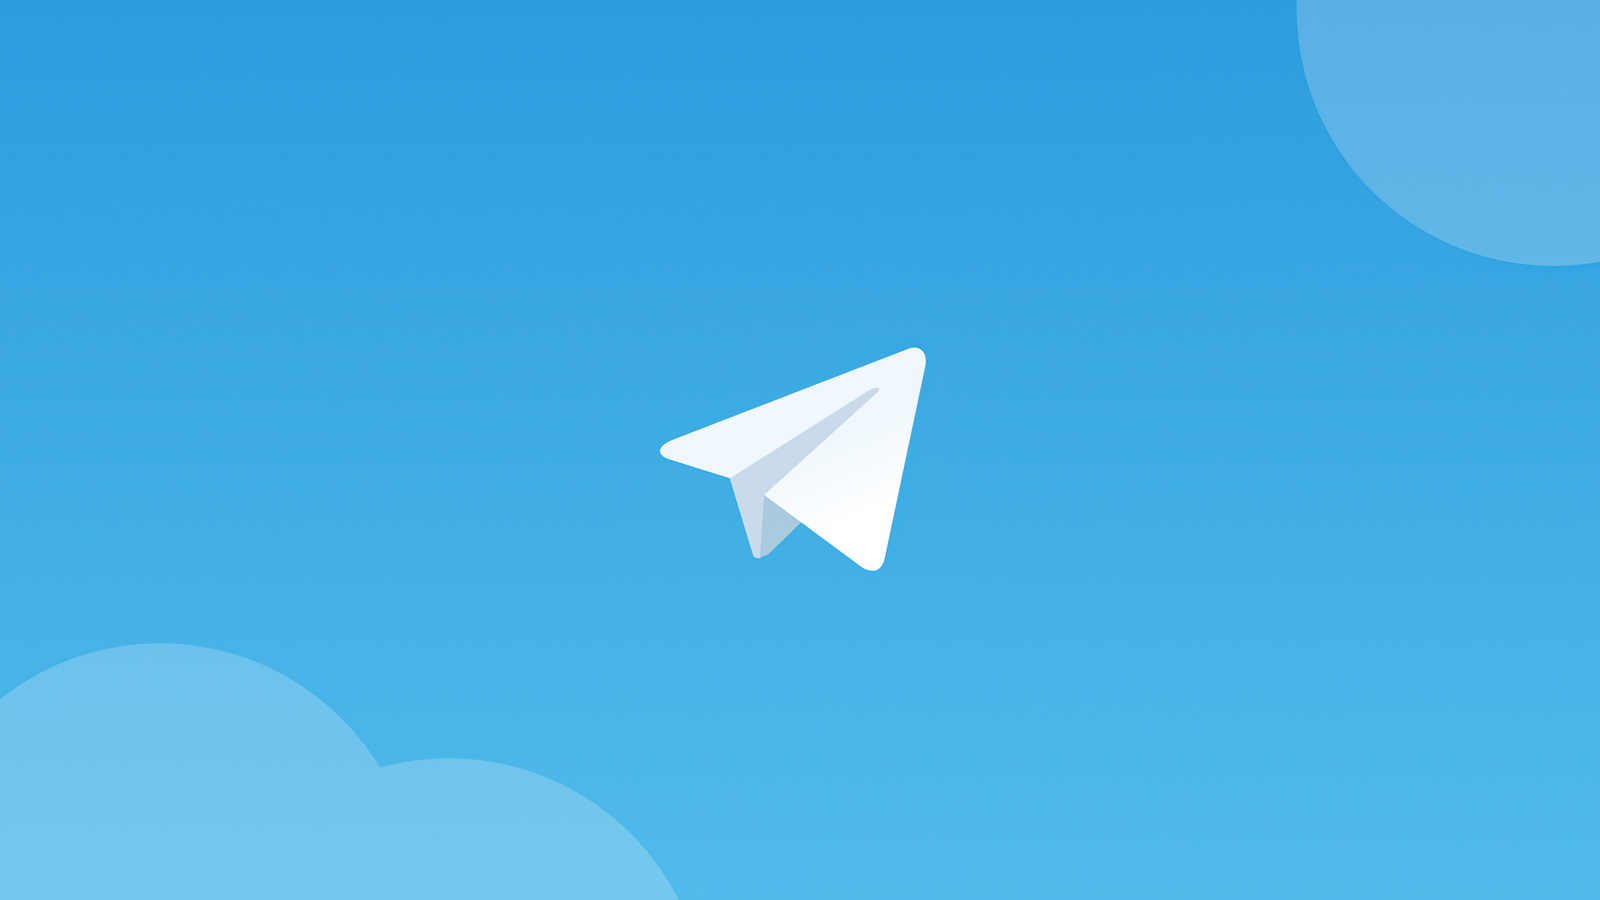 Telegram announced their premium subscription will be launched later this month